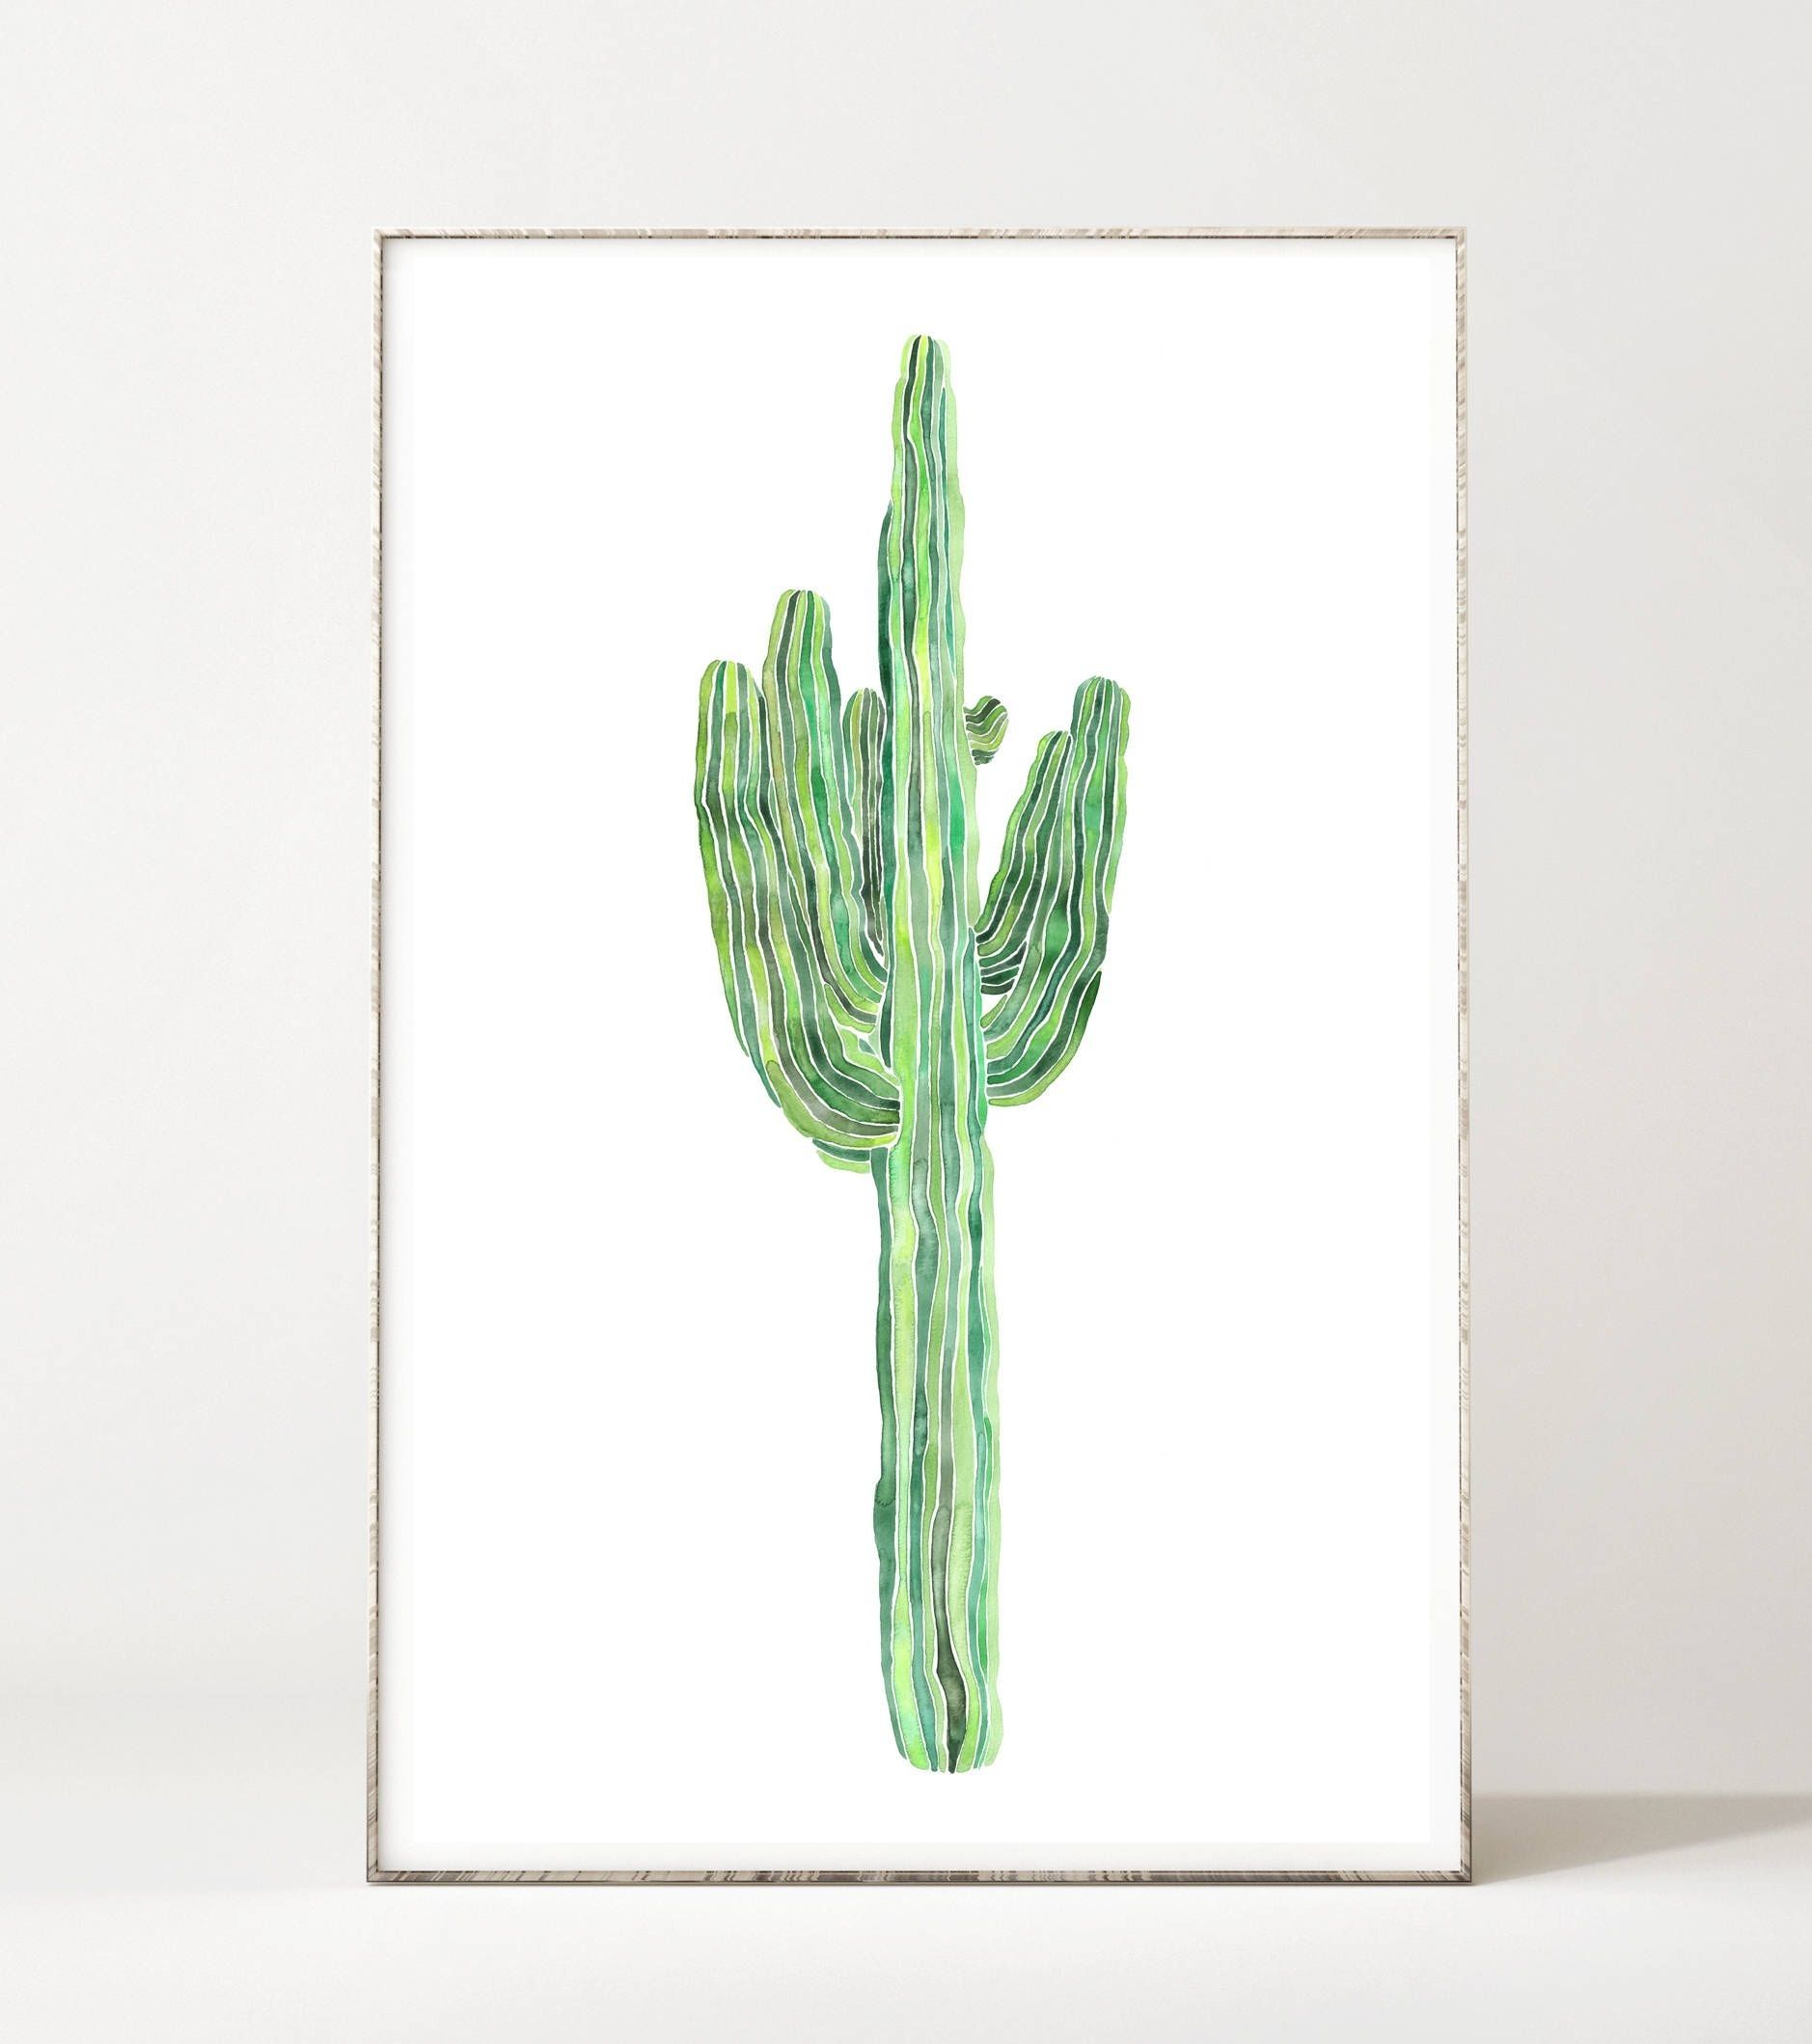 Cacti Print, Cactus Wall Art, Saguaro White Background, Minimalist Intended For Cactus Wall Art (View 7 of 20)